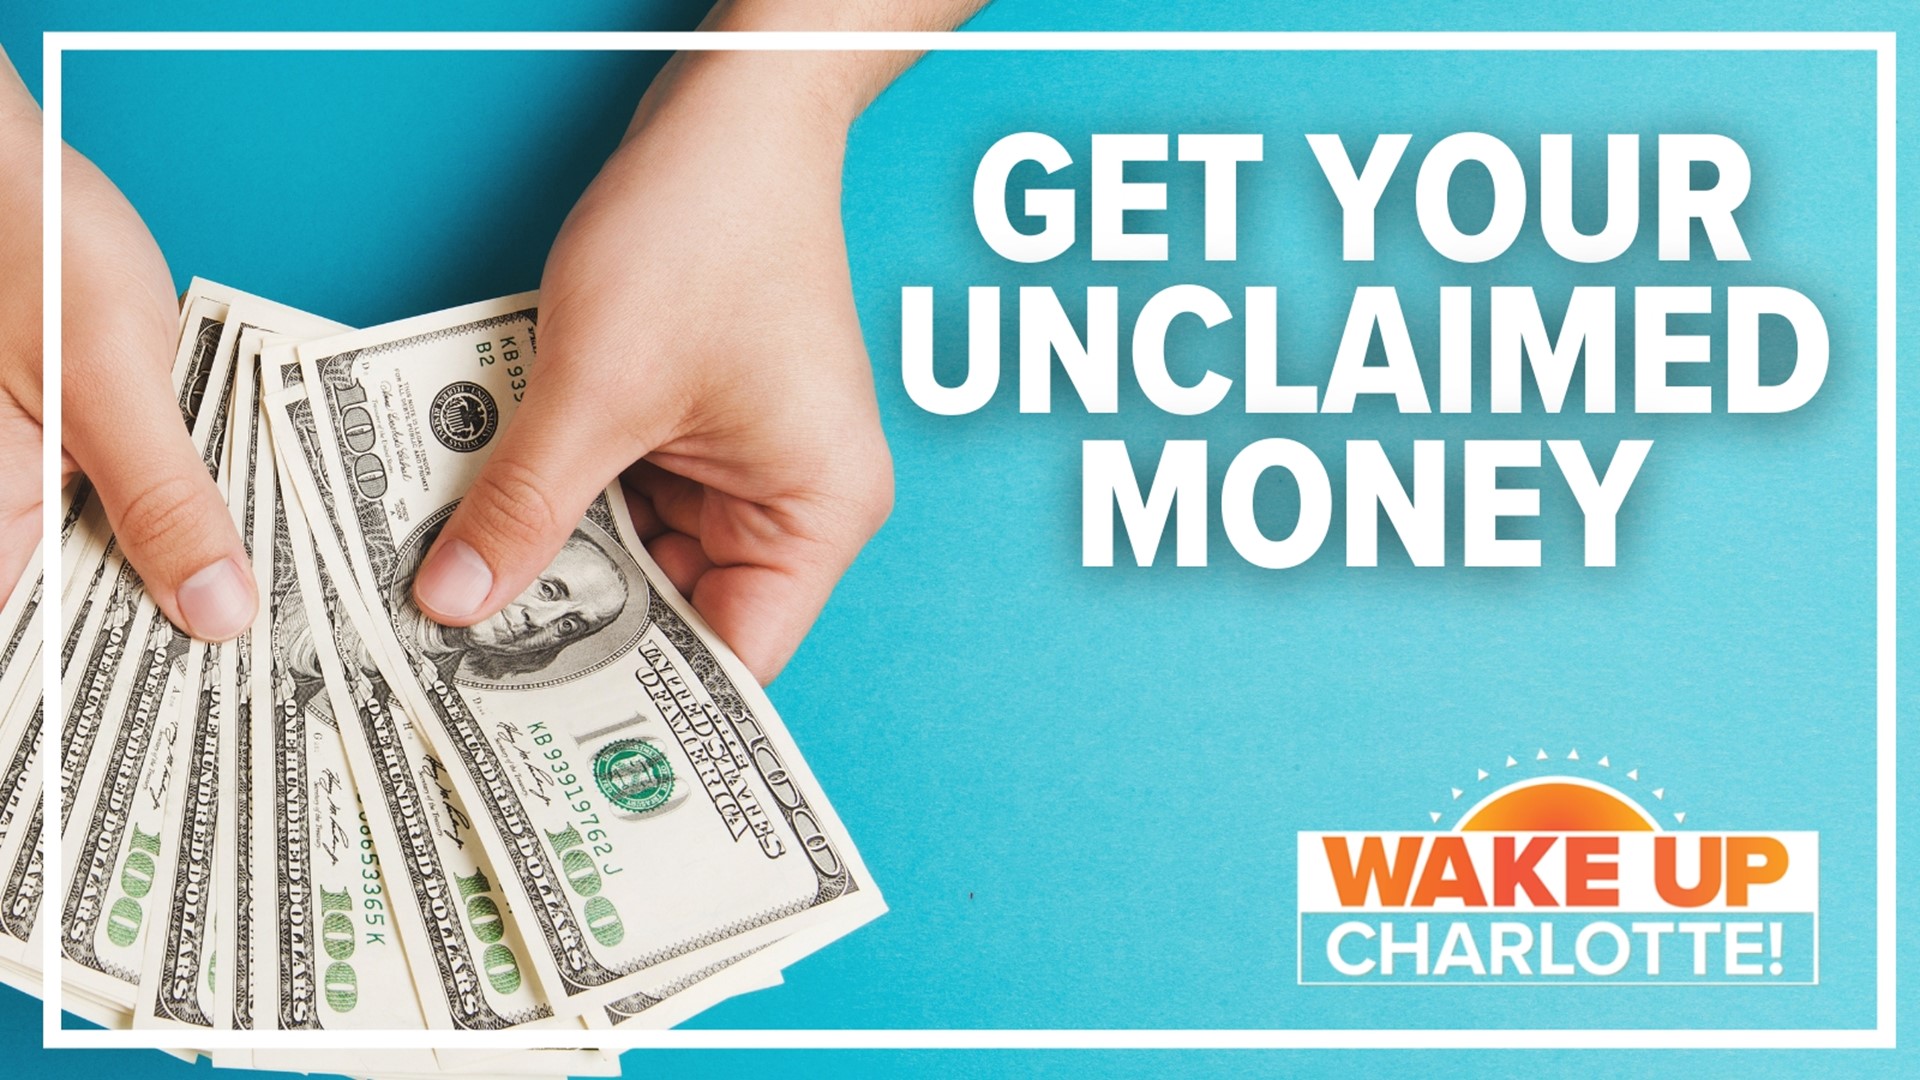 Each state has an unclaimed property program that is available to all for free.